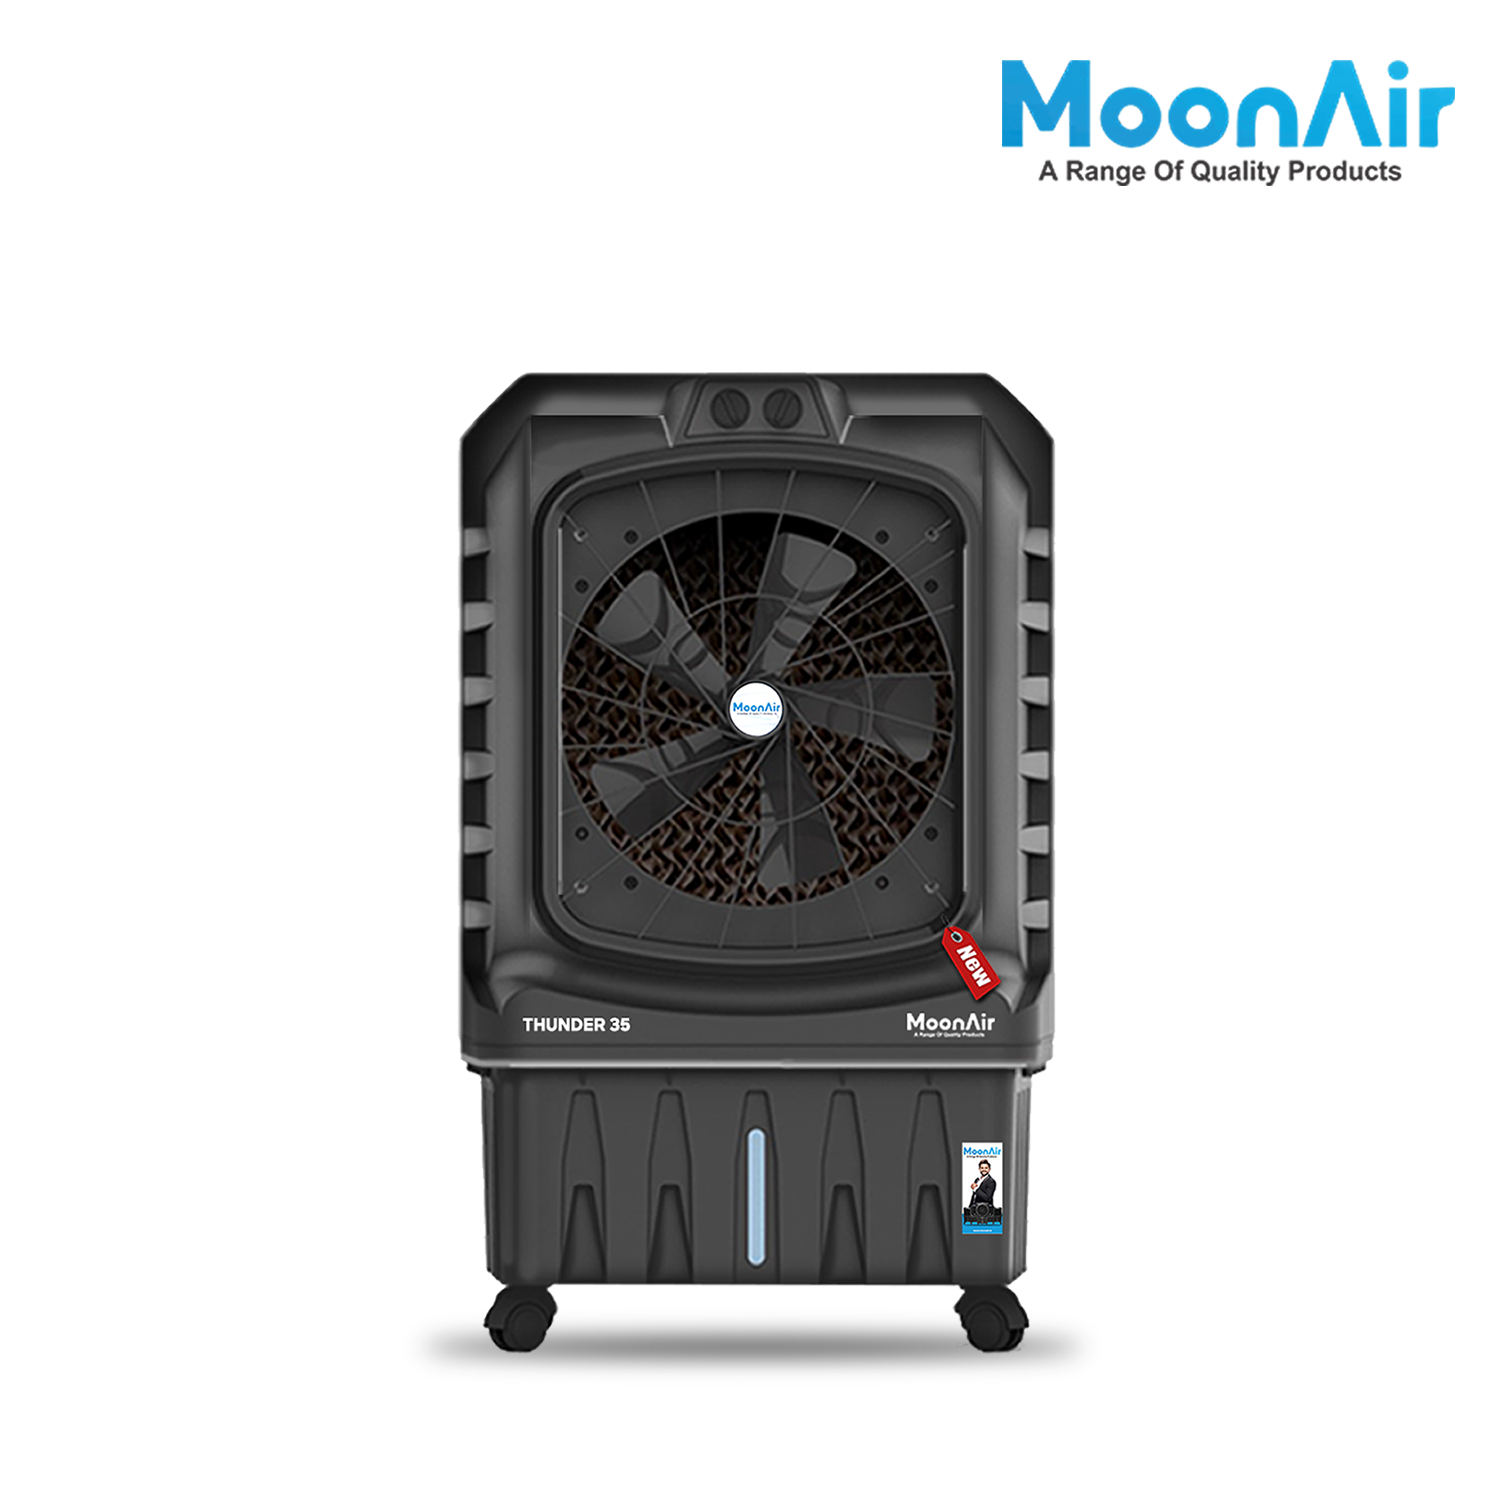 MoonAir Plastic Thunder 35 L Desert Air Cooler For Home, 5 Fin Power Flow Blade, 4-Way Air Deflection And Powerful Air Throw With High-Density Honeycomb Pads, Air Cooler, Desert Cooler, Cooler For Home, Desert Air Cooler, Air Cooler For Home; Black